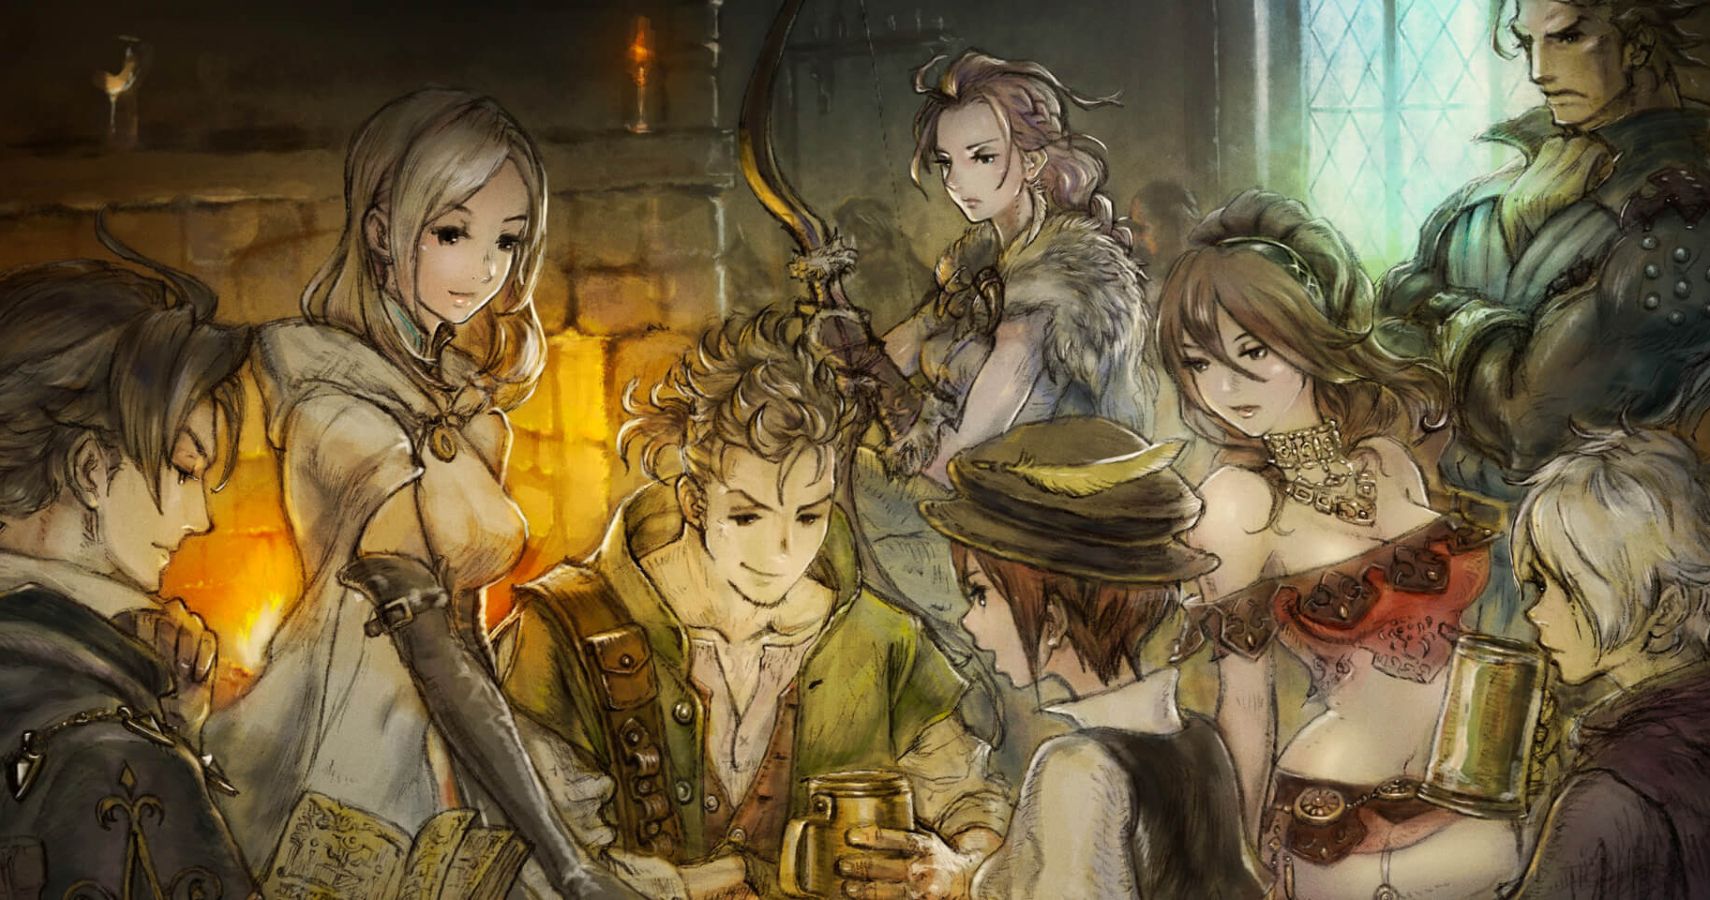 All 8 characters from the JRPG Octopath Traveler